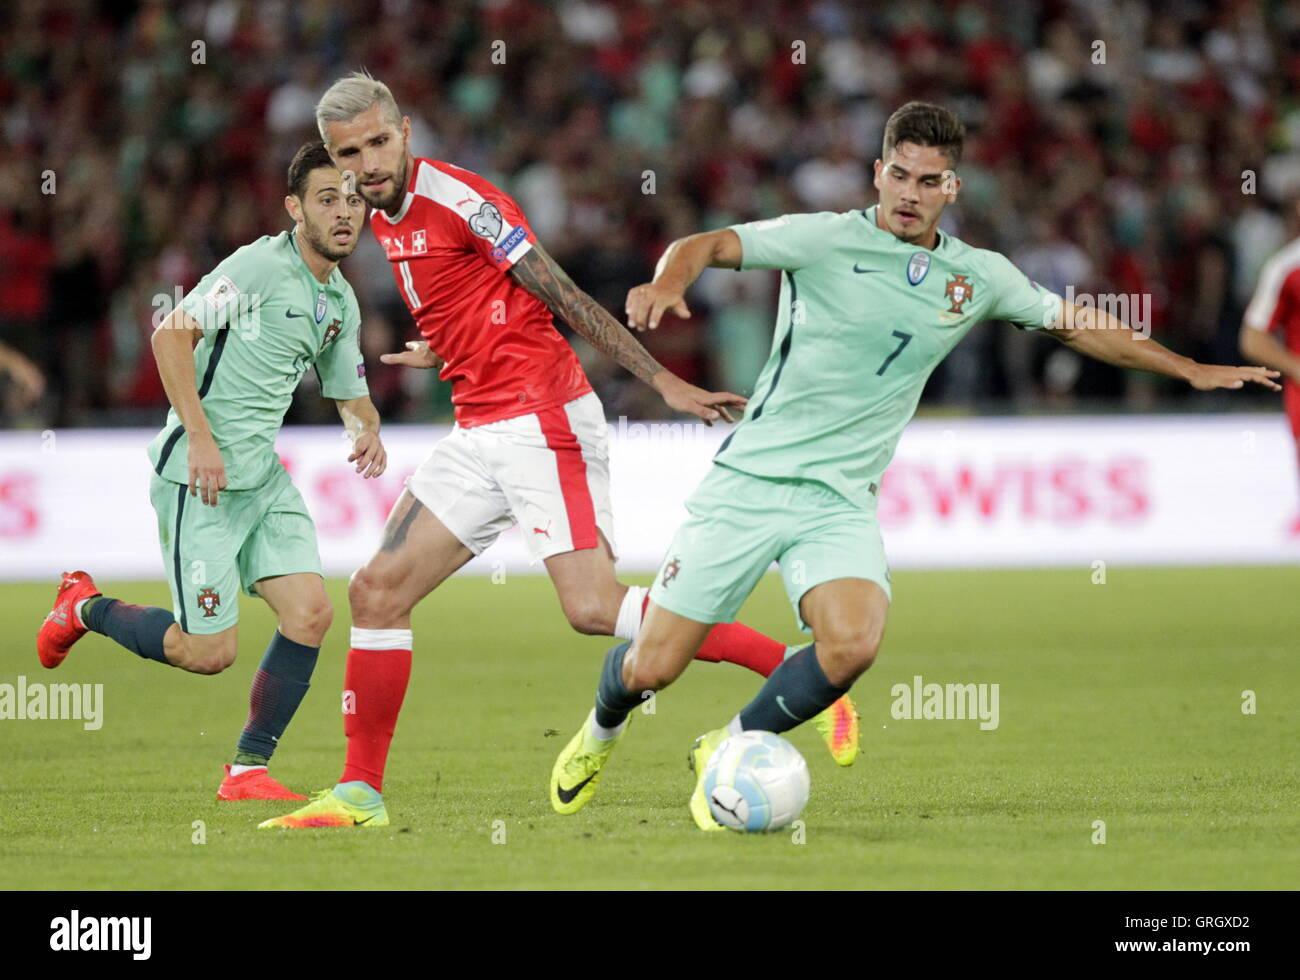 Basel, Switzerland. 6 September 2016 José Fonté and Valon Behrami  in action during the qualifying match of the World Cup Group B Switzerland against Portugal at St Jakob Park in Basel, Switzerland Credit:  Laurent Lairys/Agence Locevaphotos/Alamy Live News Stock Photo